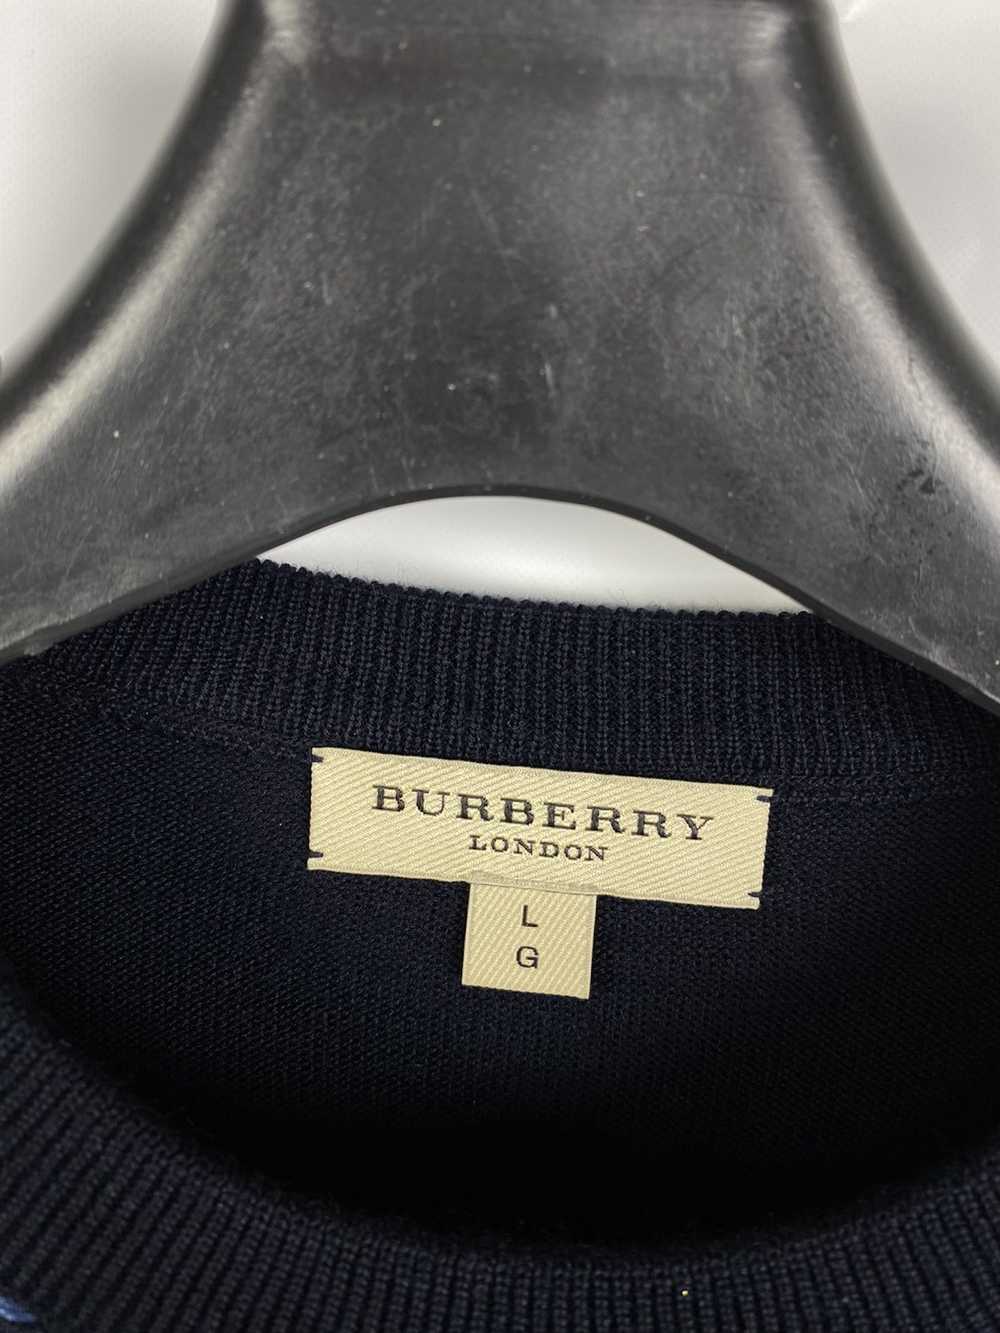 Burberry Burberry London Wool Knit Blue Sweater s… - image 3